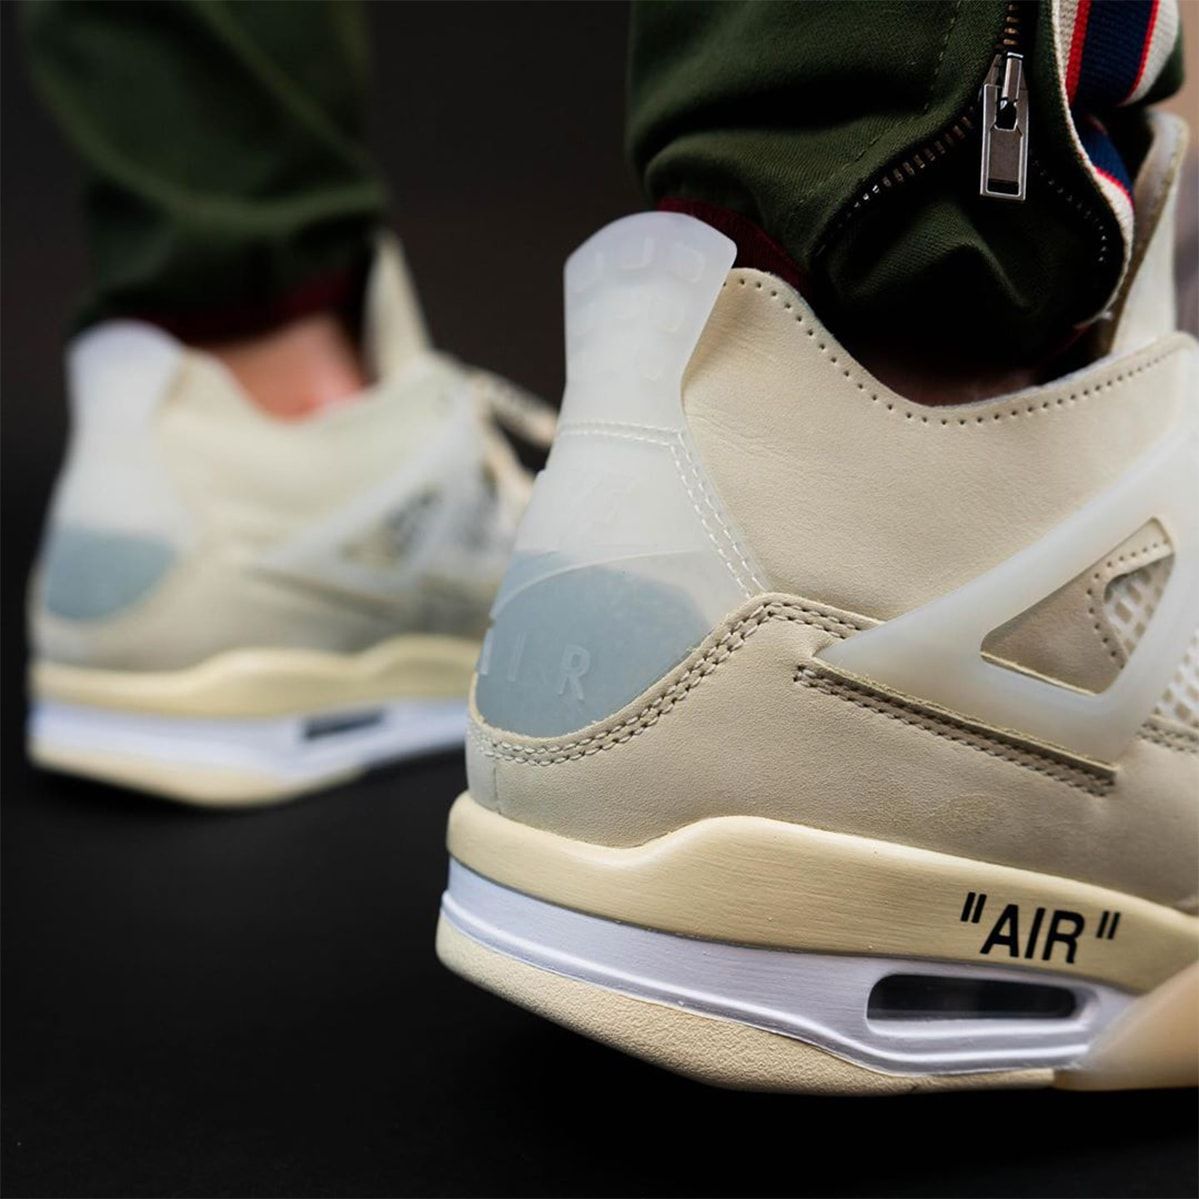 AIR JORDAN 4 OFF WHITE SAIL (WMNS)REVIEW & ON FEET! THESE ARE